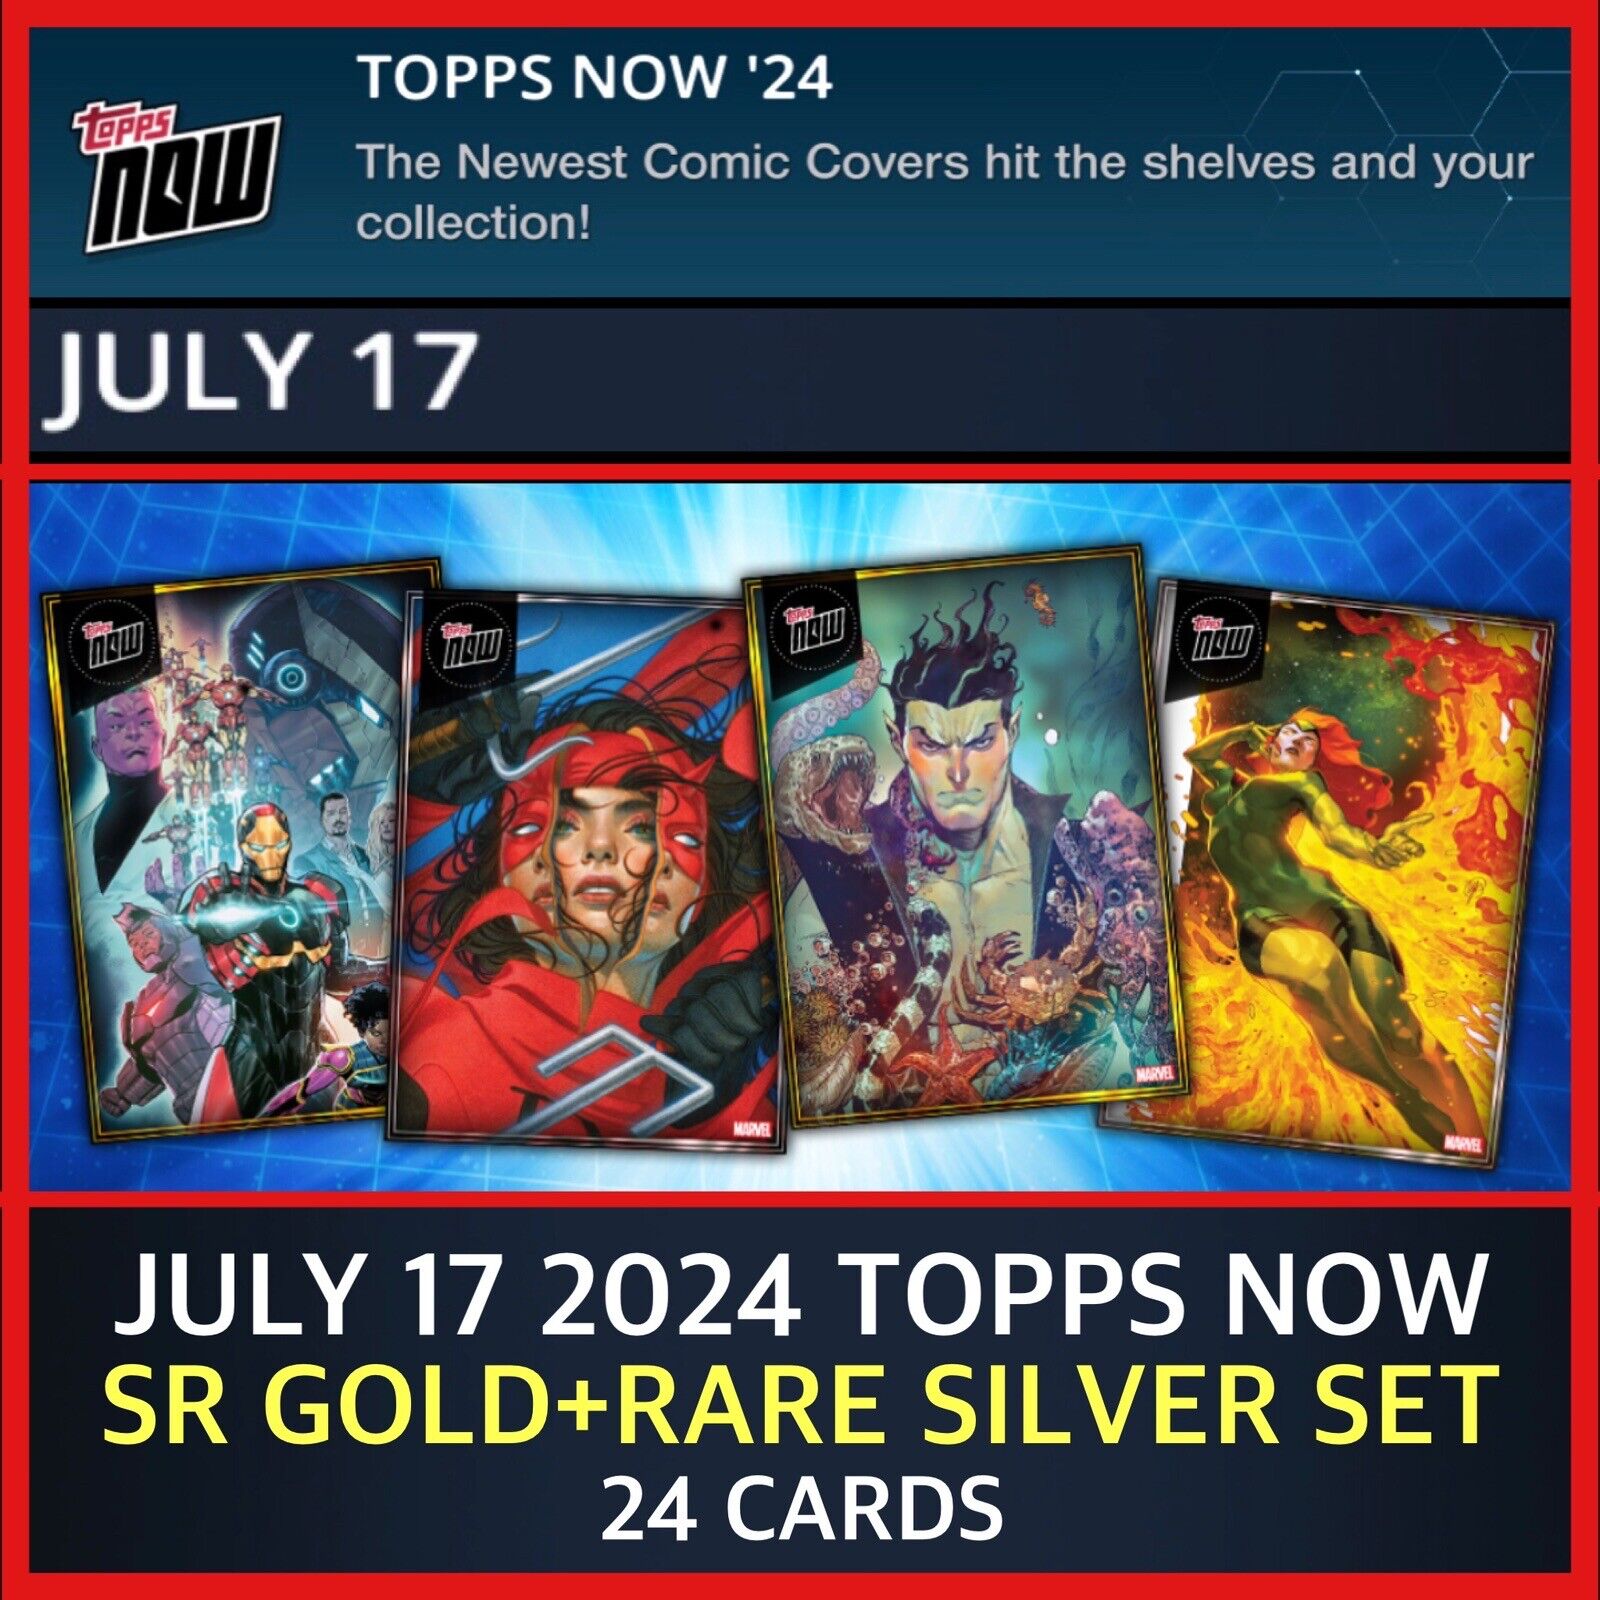 JULY 17 TOPPS NOW DIGITAL-SR GOLD+RARE SILVER 24 CARD SET-TOPPS MARVEL COLLECT